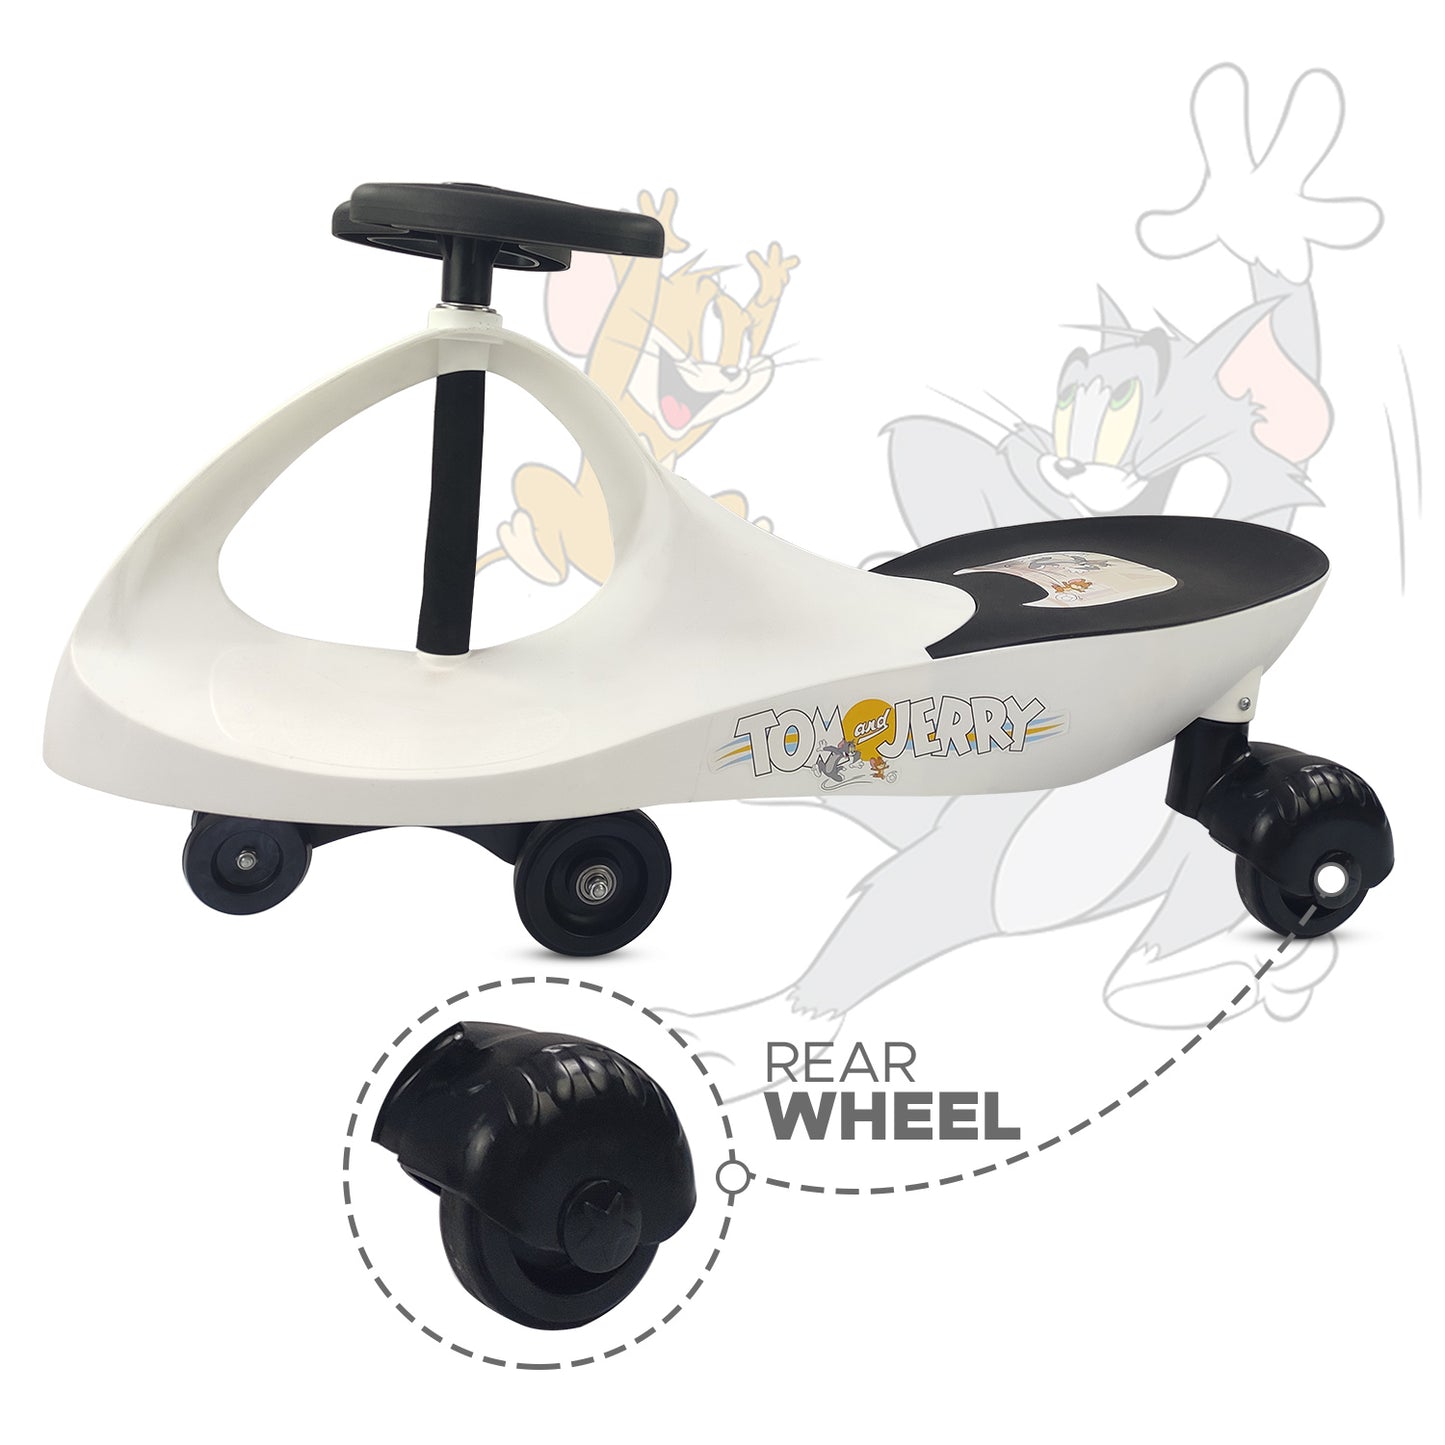 Nhr Tom & Jerry Magic Swing Car, Ride On for Kids with Scratch Free Wheels (Choose Any Color)